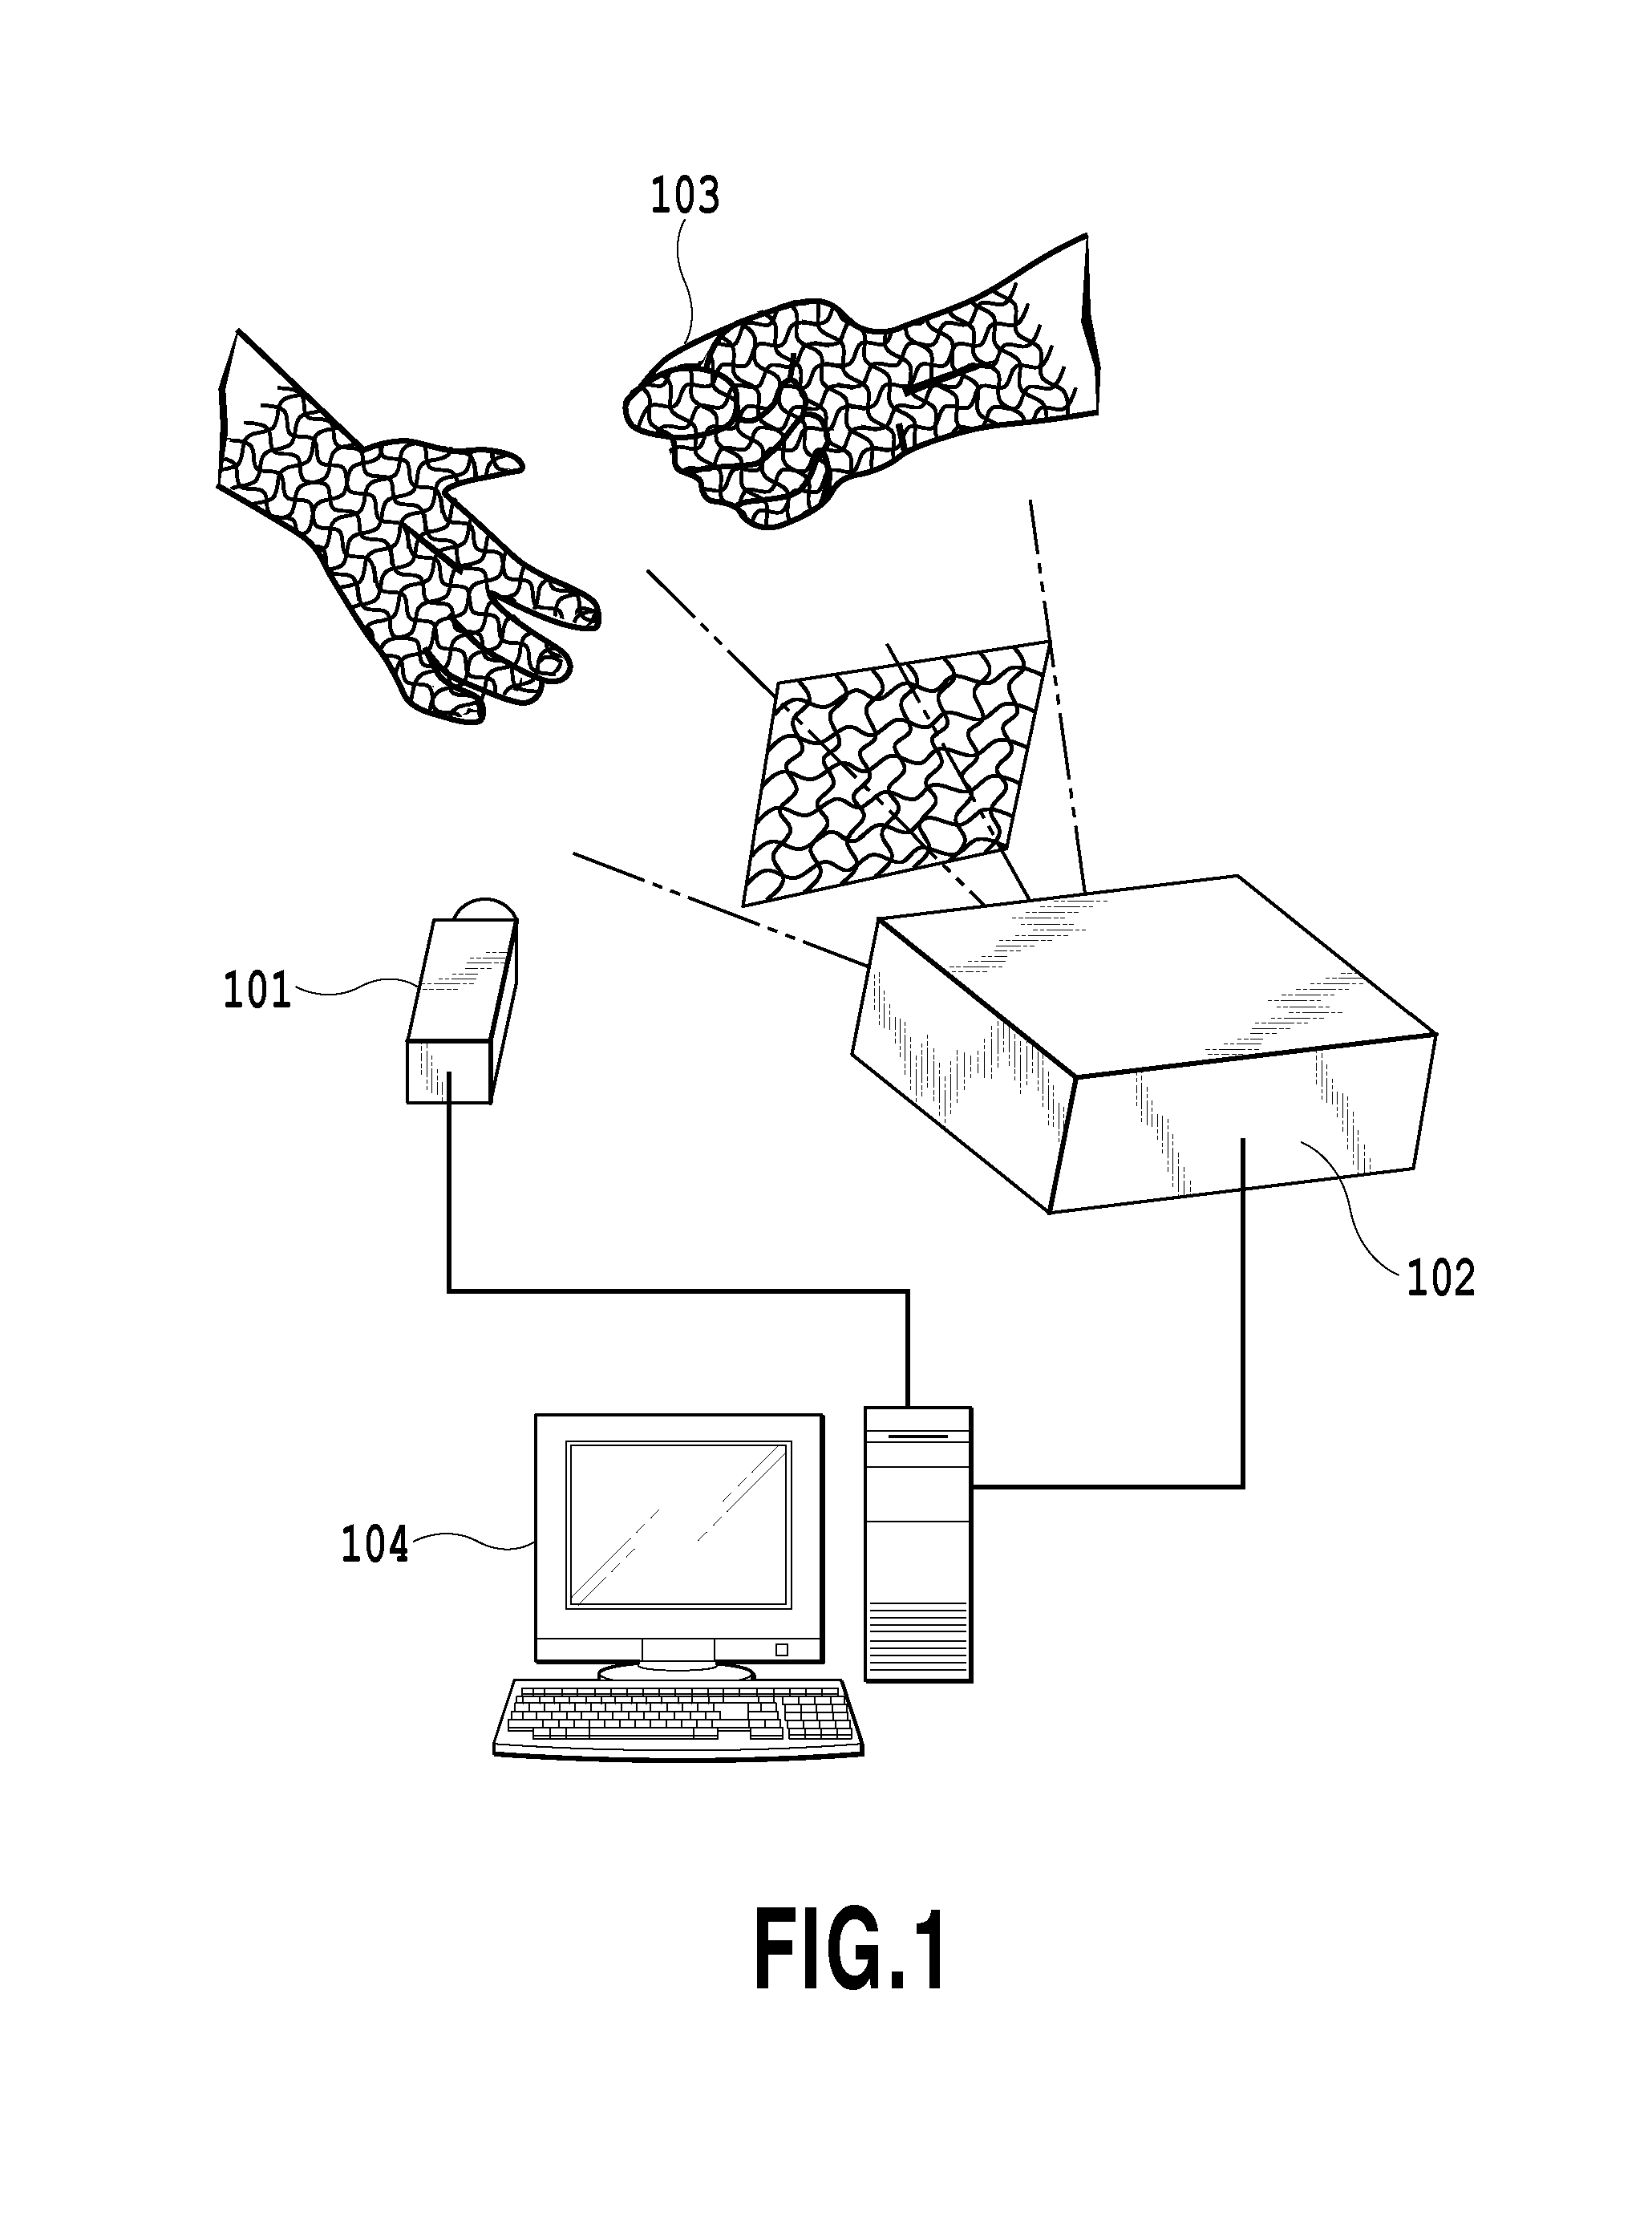 Image processing system, and image processing method